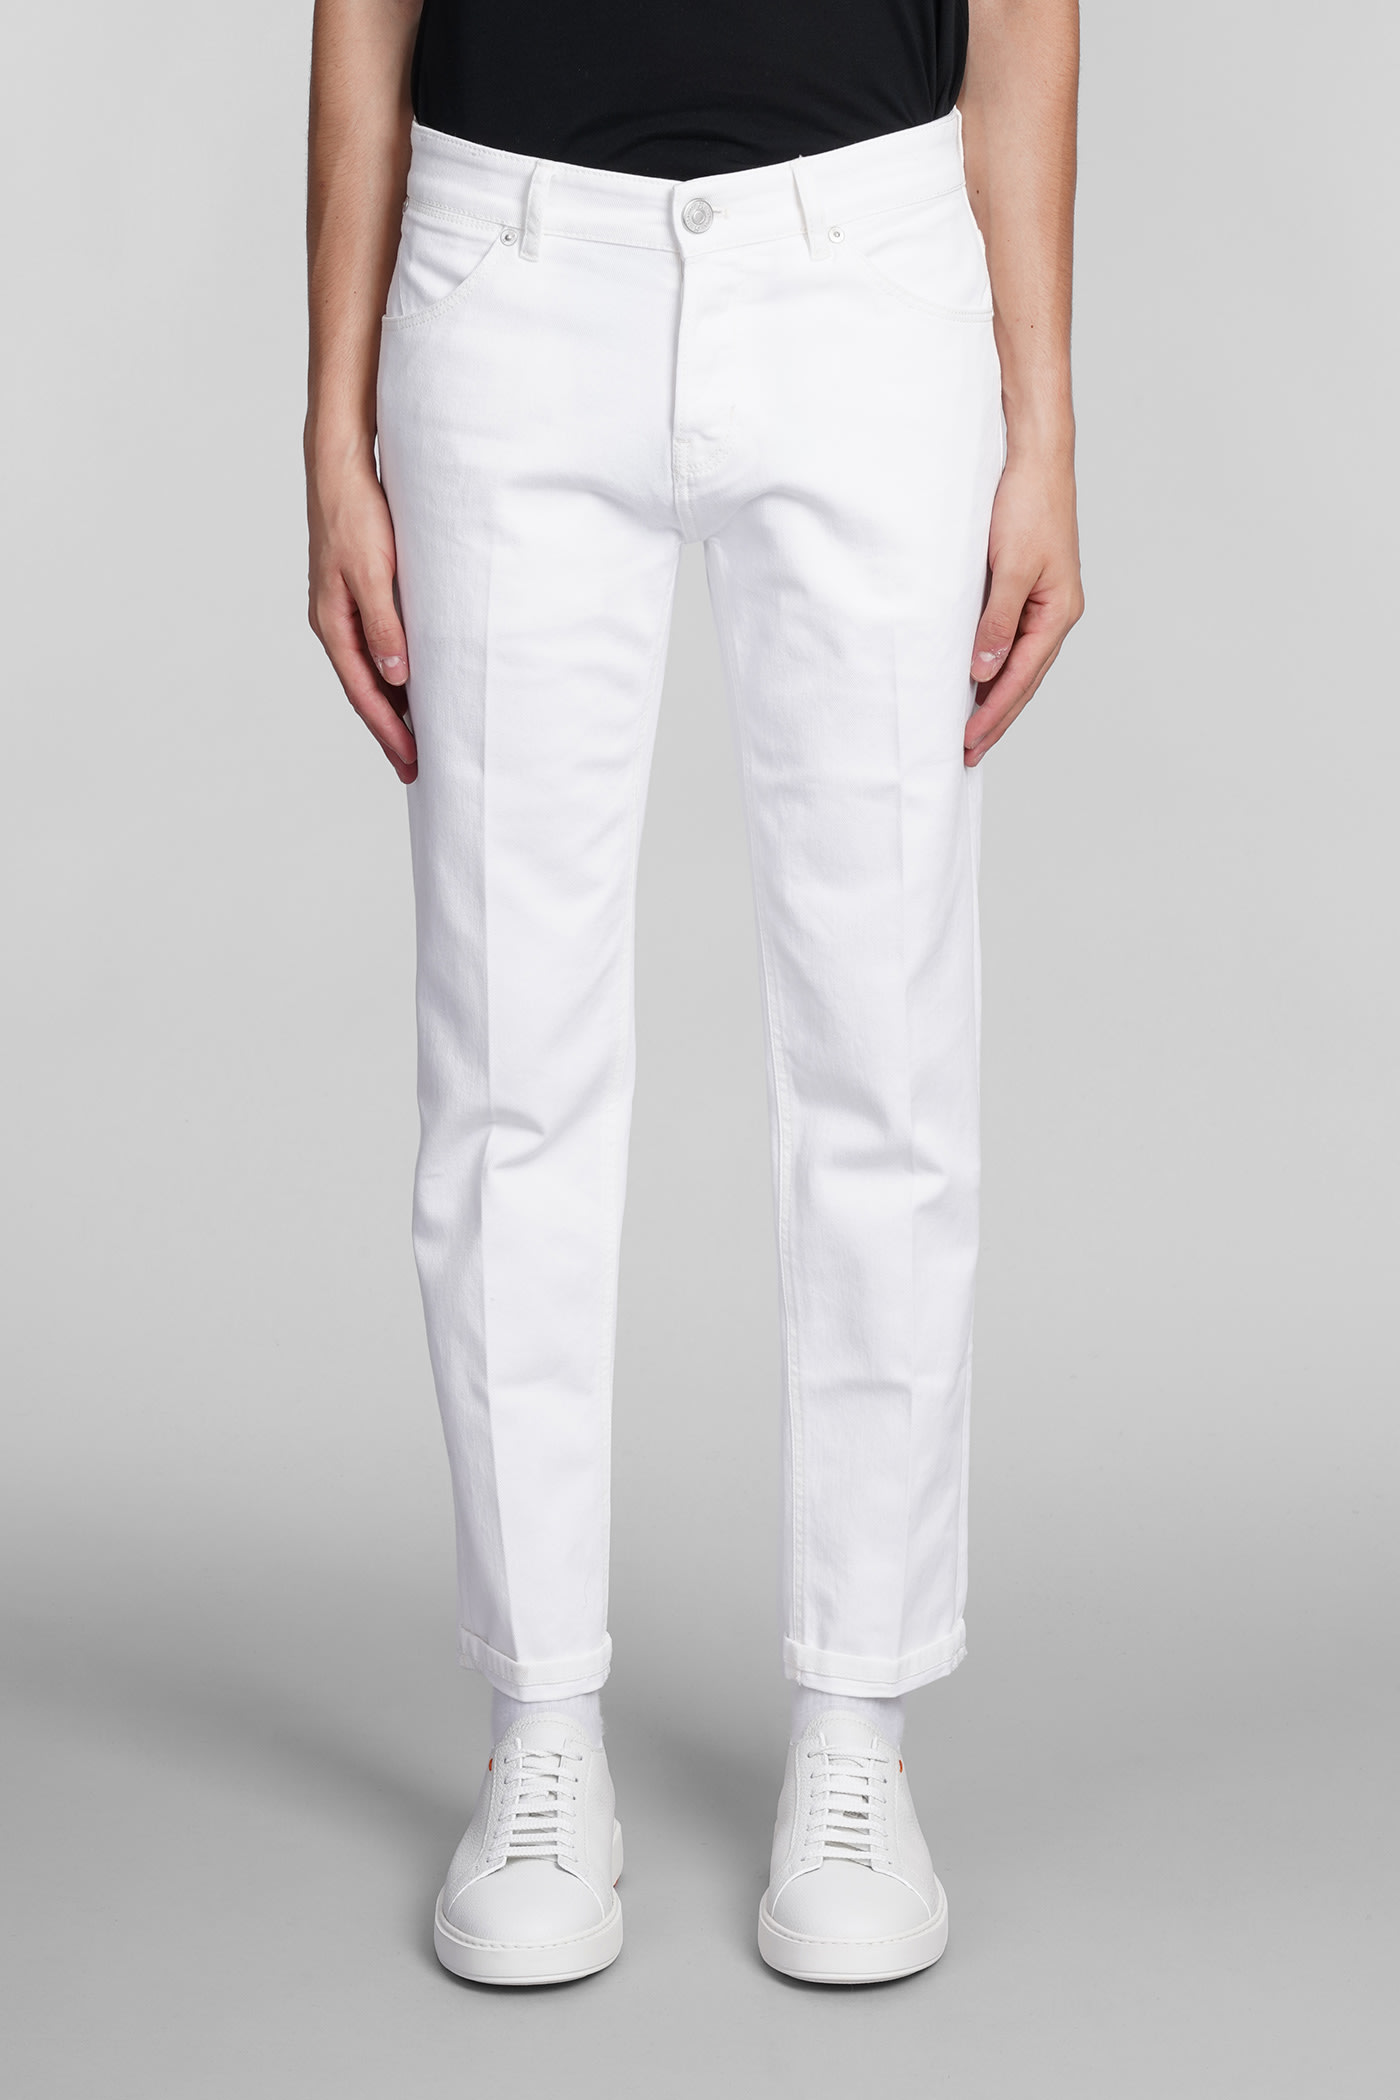 PT01 JEANS IN WHITE COTTON